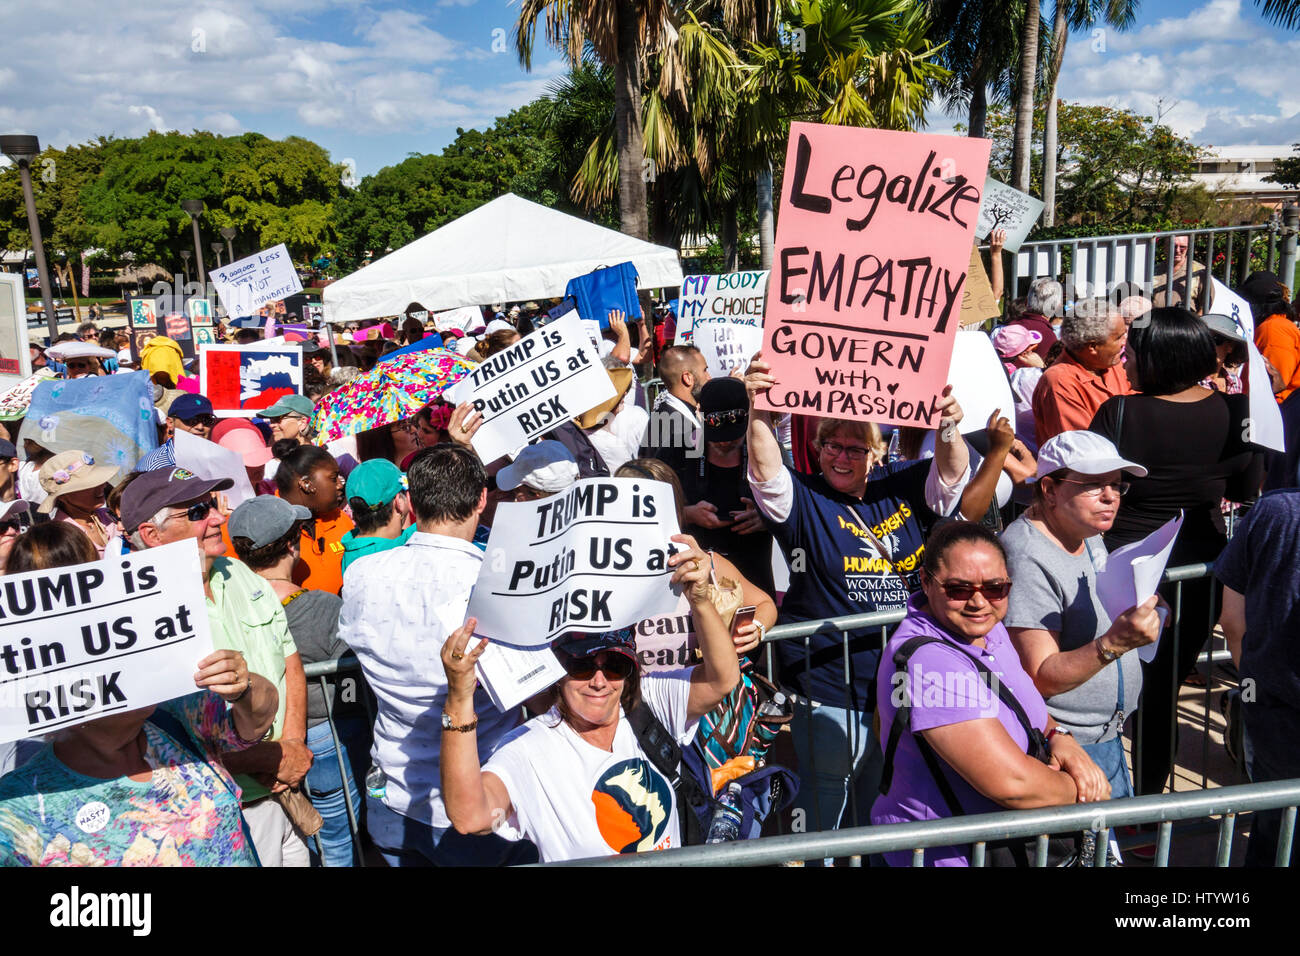 Miami Florida,Downtown,Bayfront Park,Women's March,political protest,march,human rights,advocacy,sign,woman female women,holding sign,protesters,anti- Stock Photo